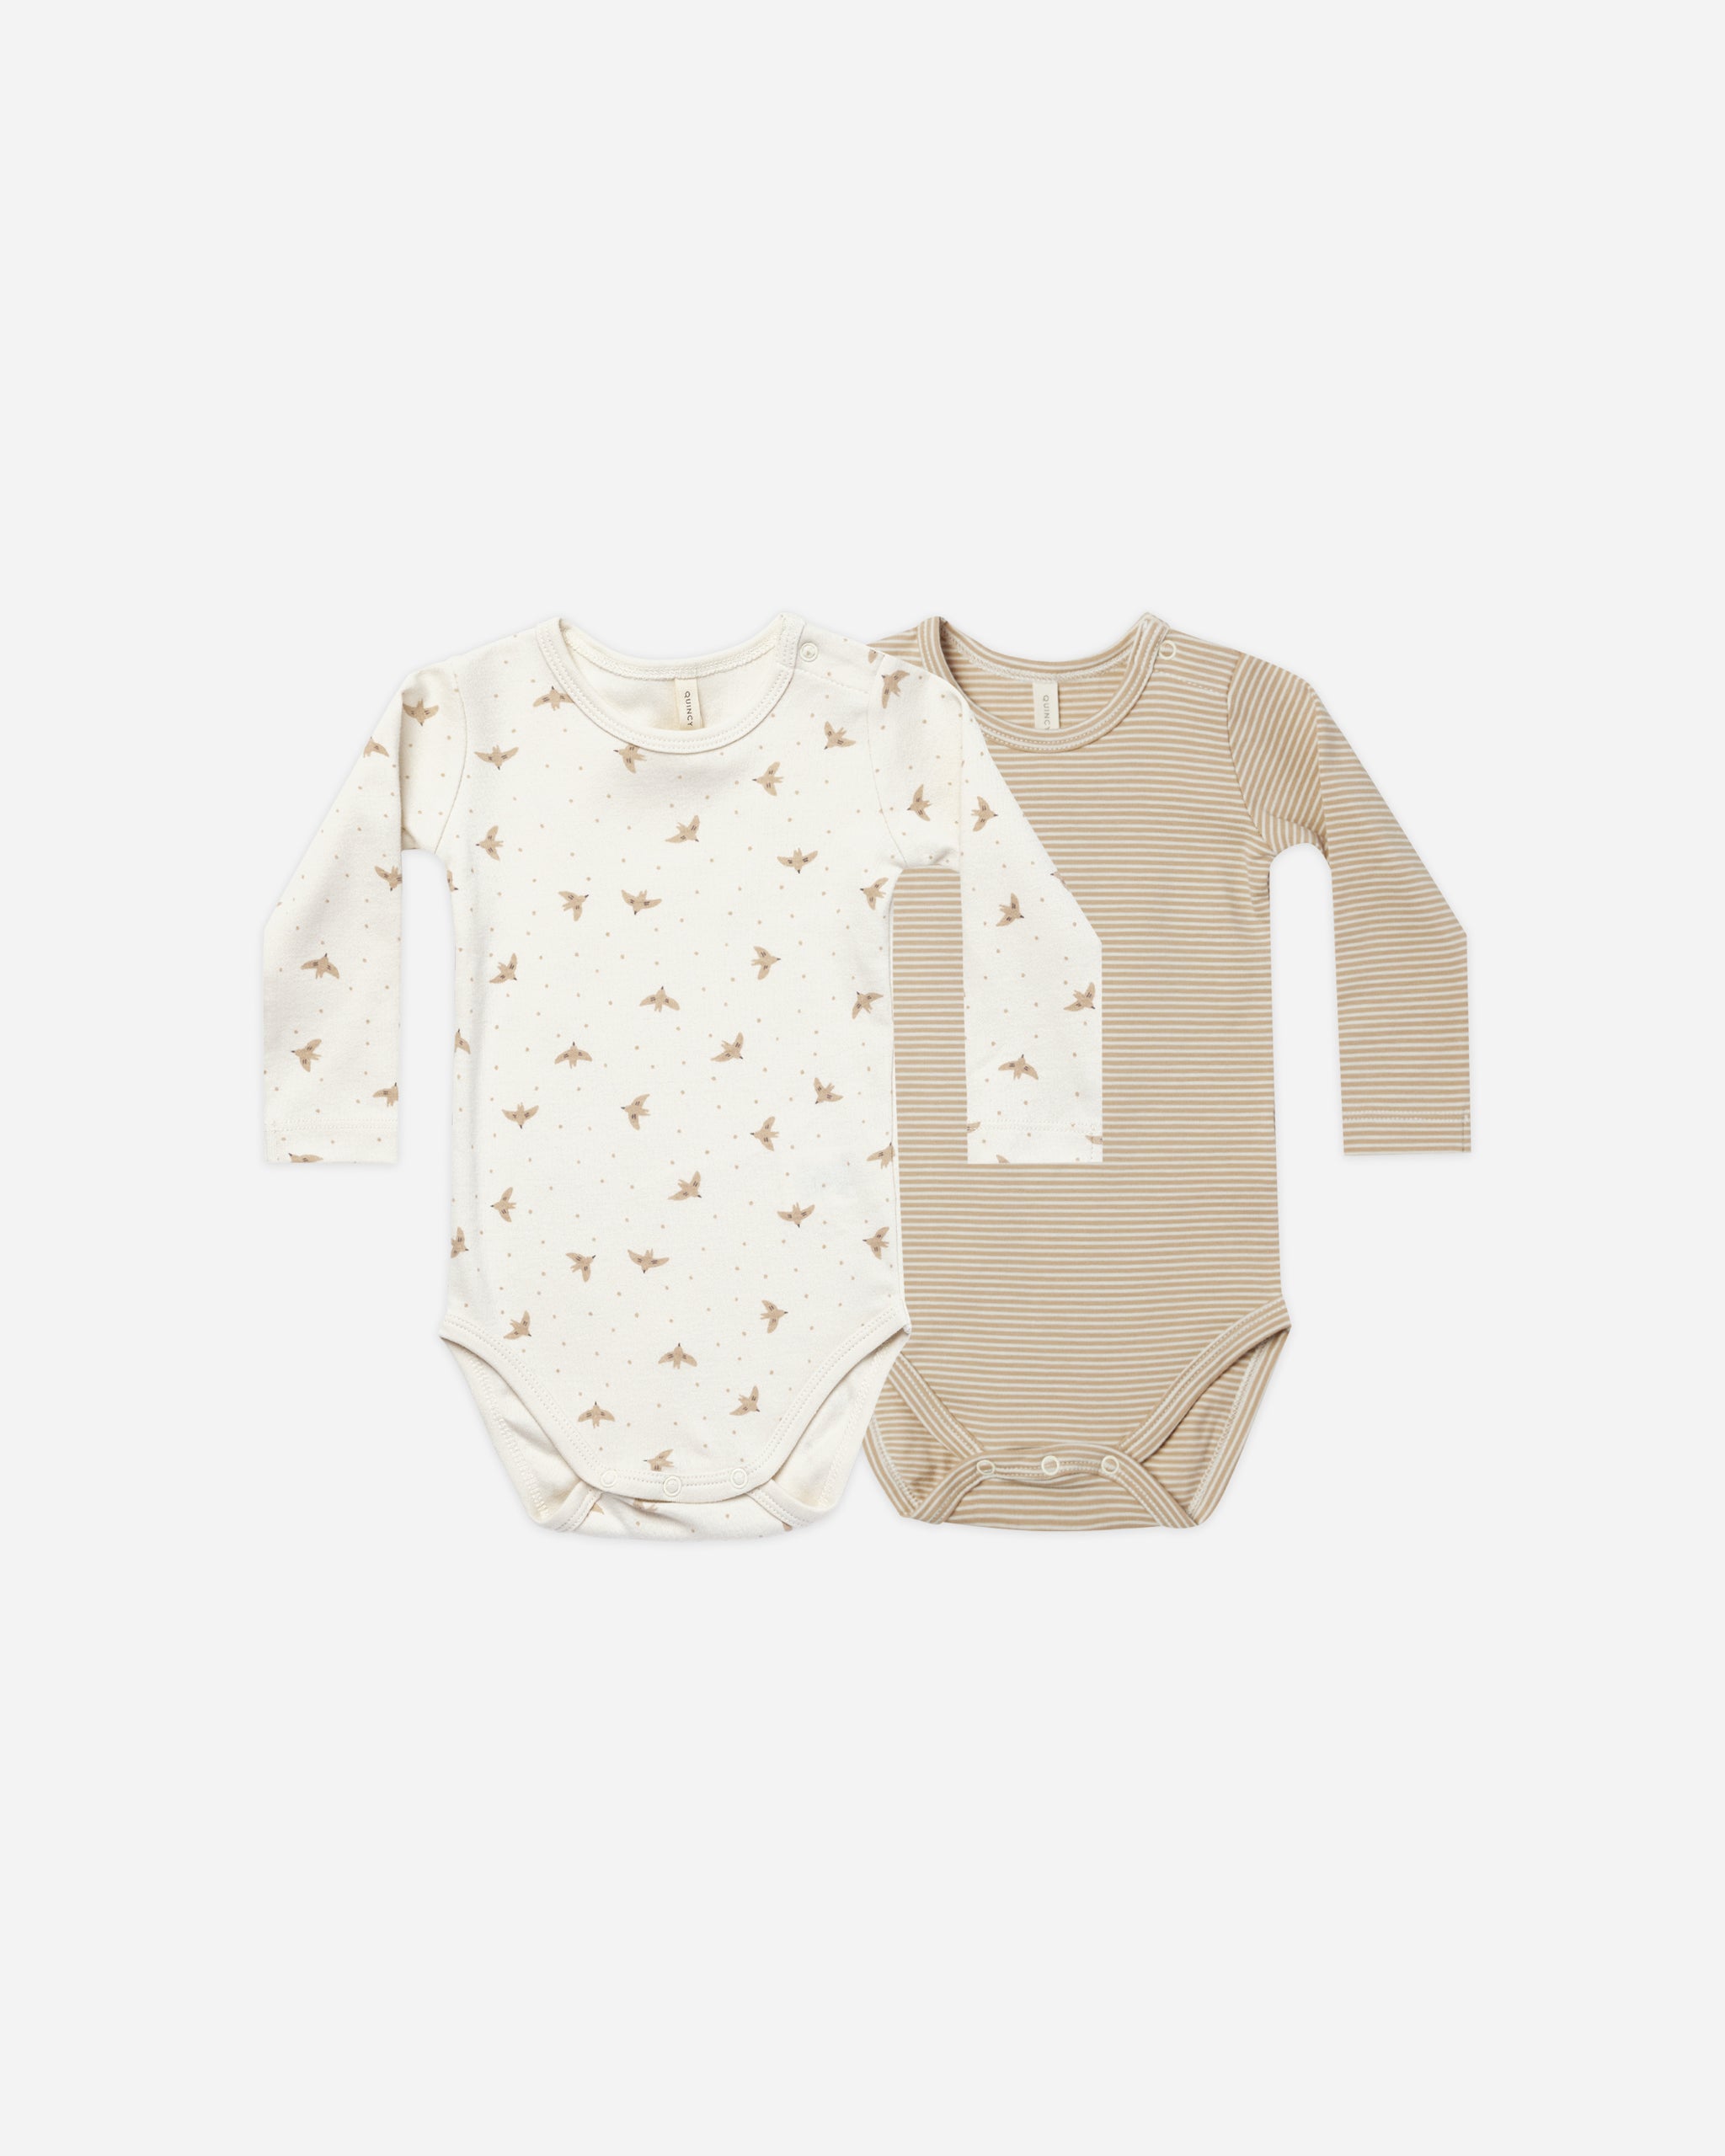 Jersey Bodysuit, 2-Pack || Doves, Latte Micro Stripe - Rylee + Cru | Kids Clothes | Trendy Baby Clothes | Modern Infant Outfits |